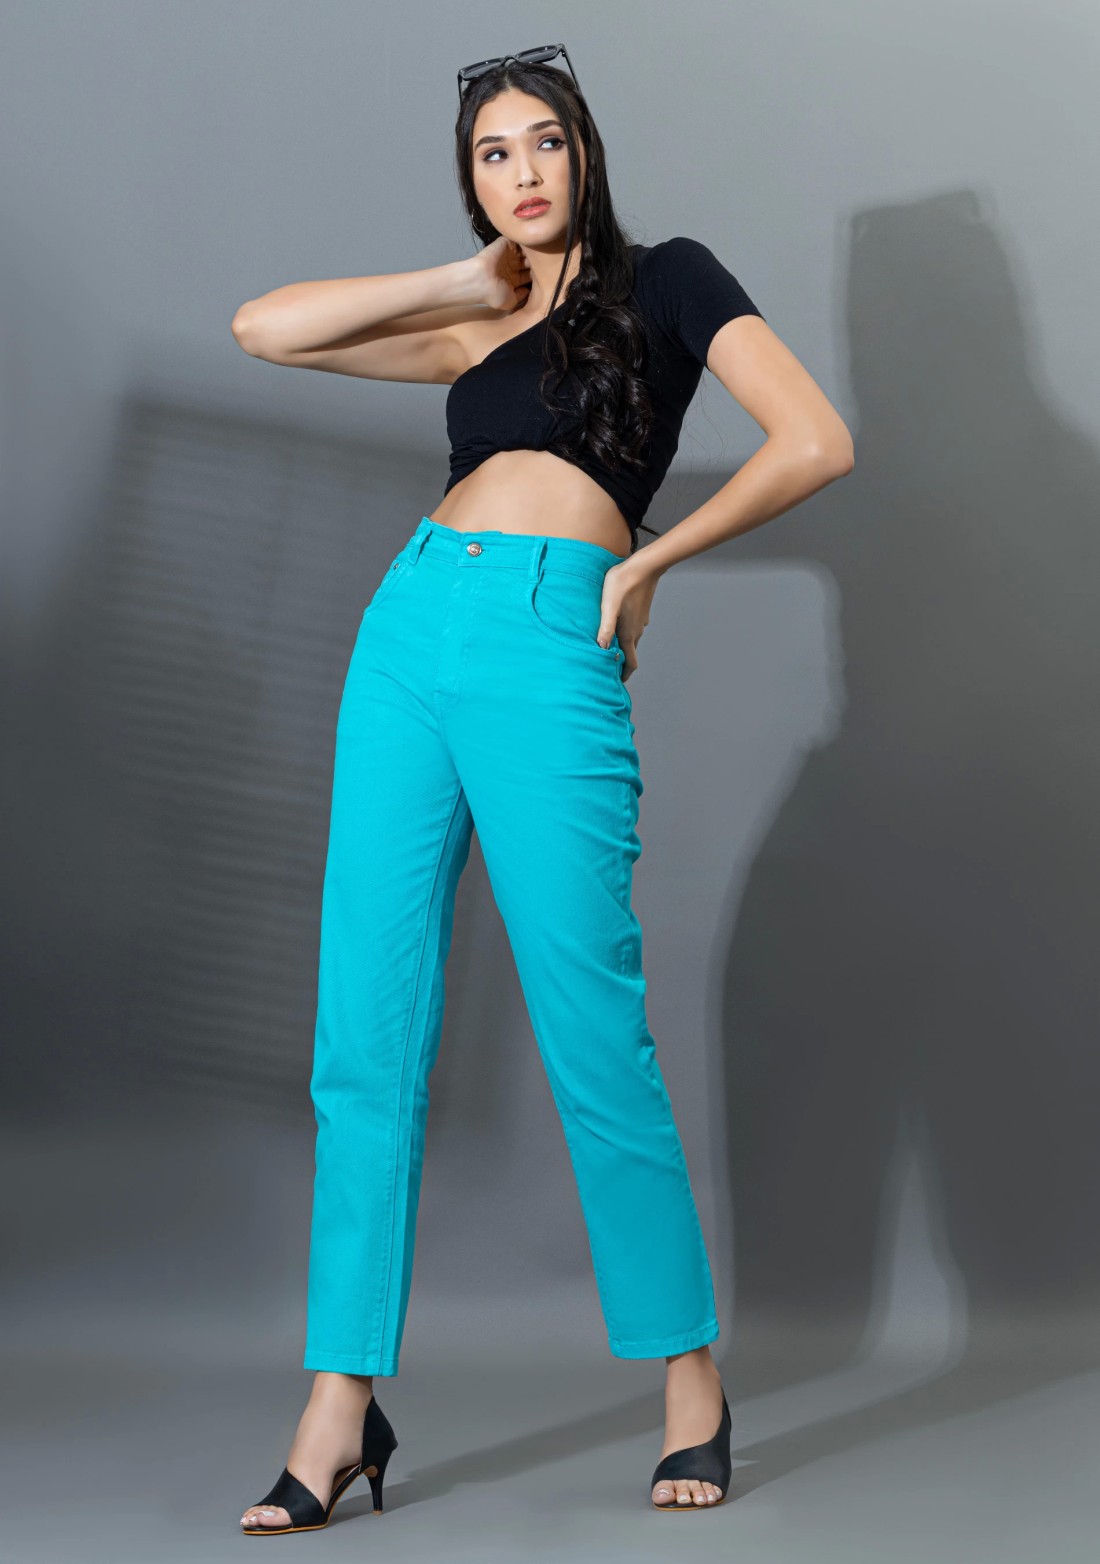 Turquoise Straight Fit Rhysley Women's Jeans